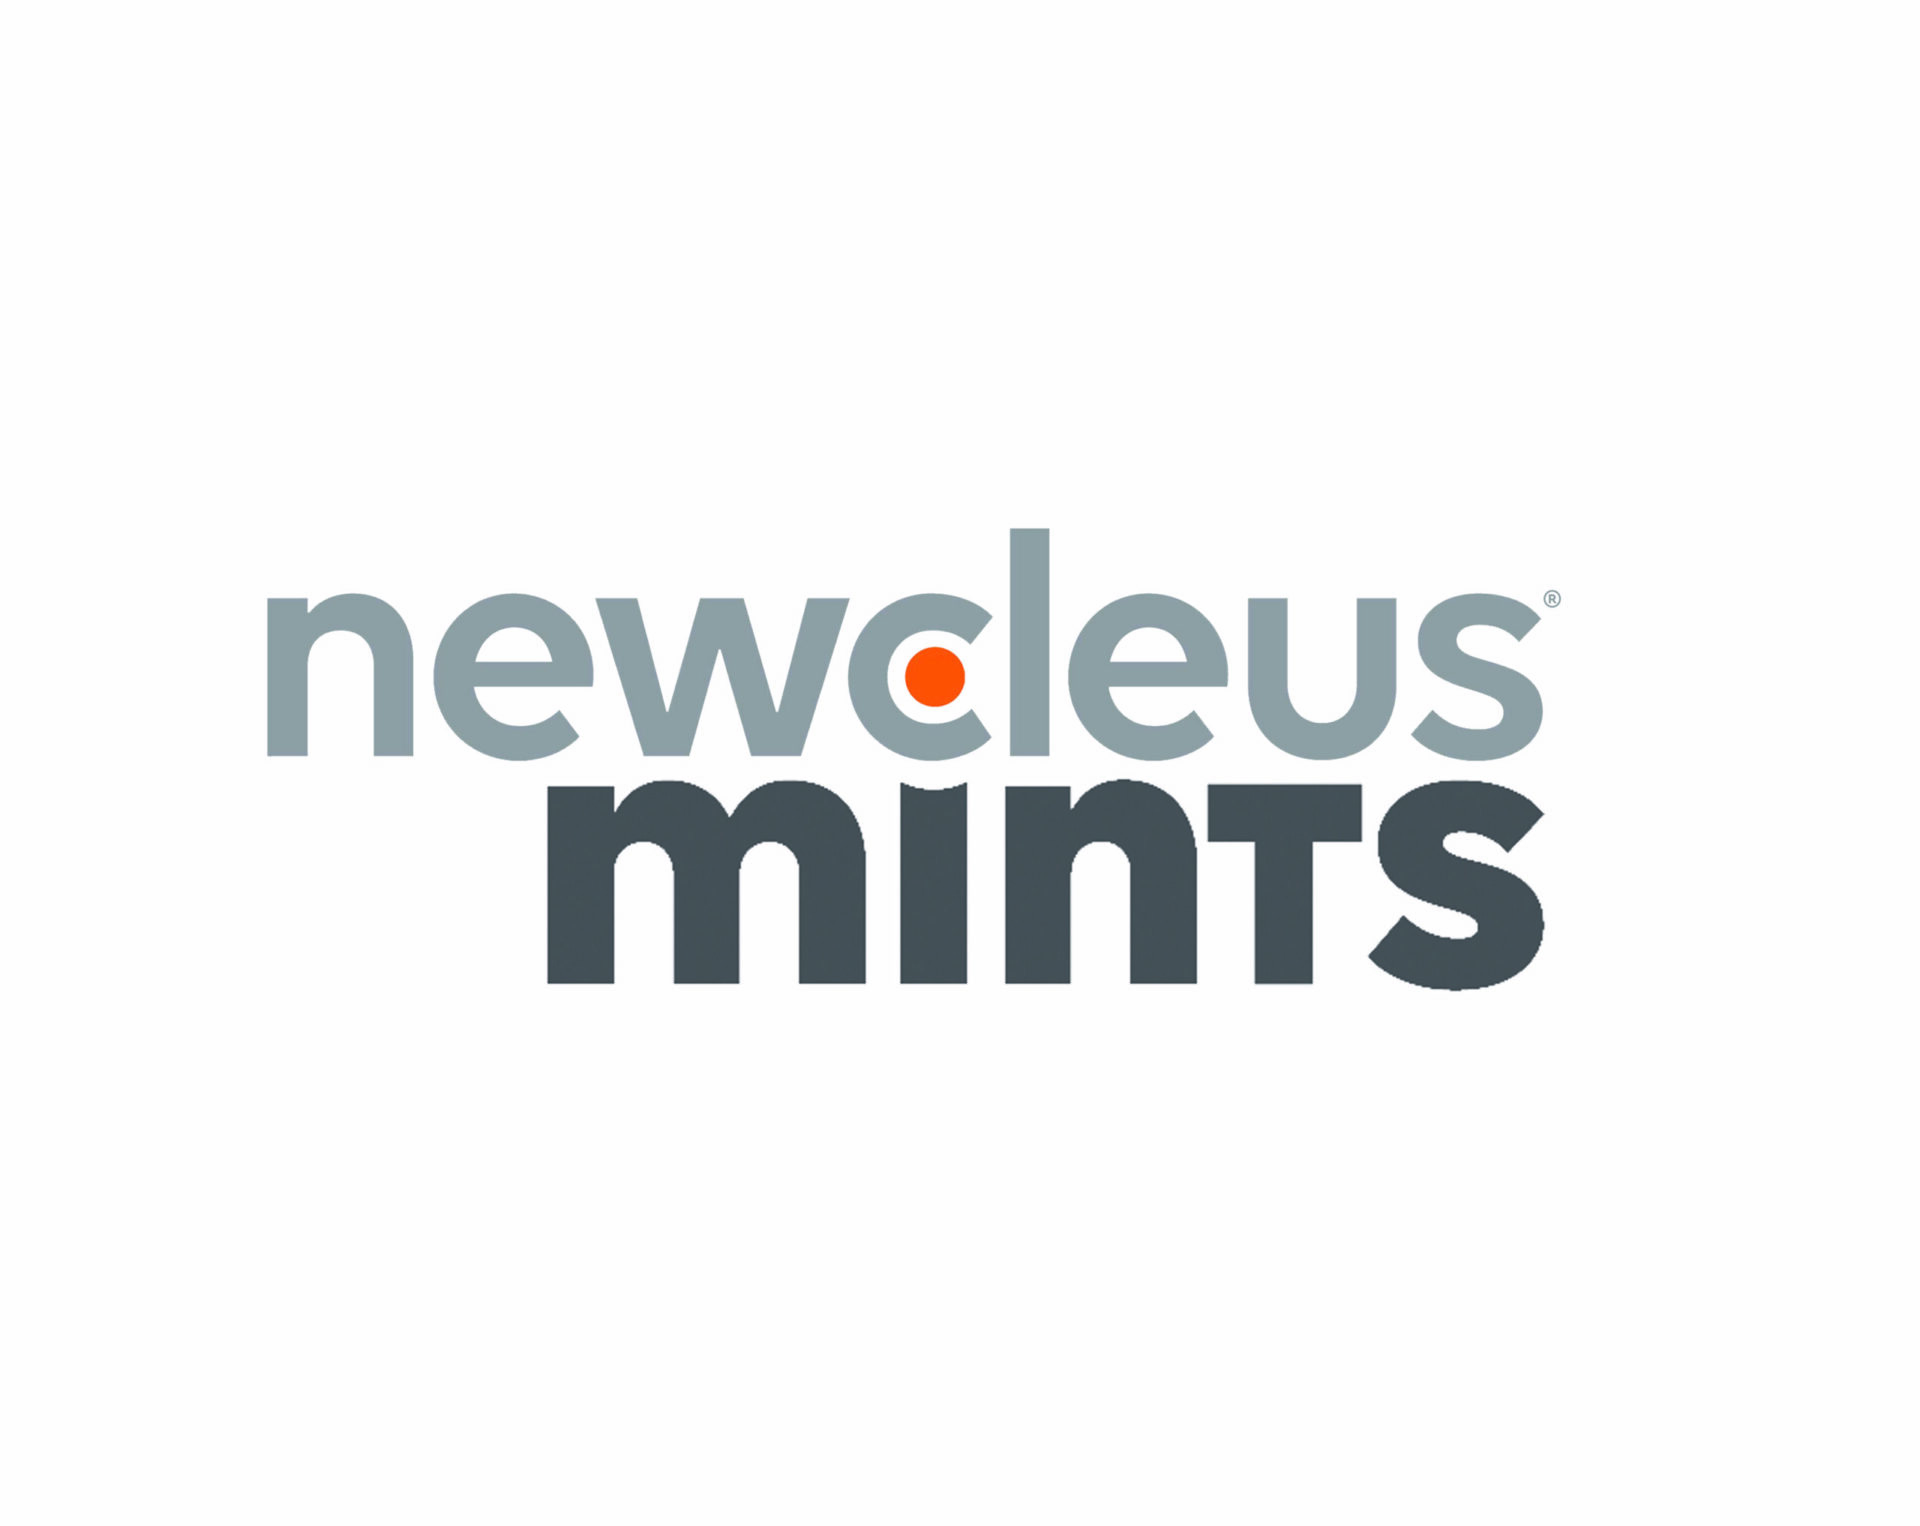 Newcleus Multi-Informational Network Tracking System, known as MINTS